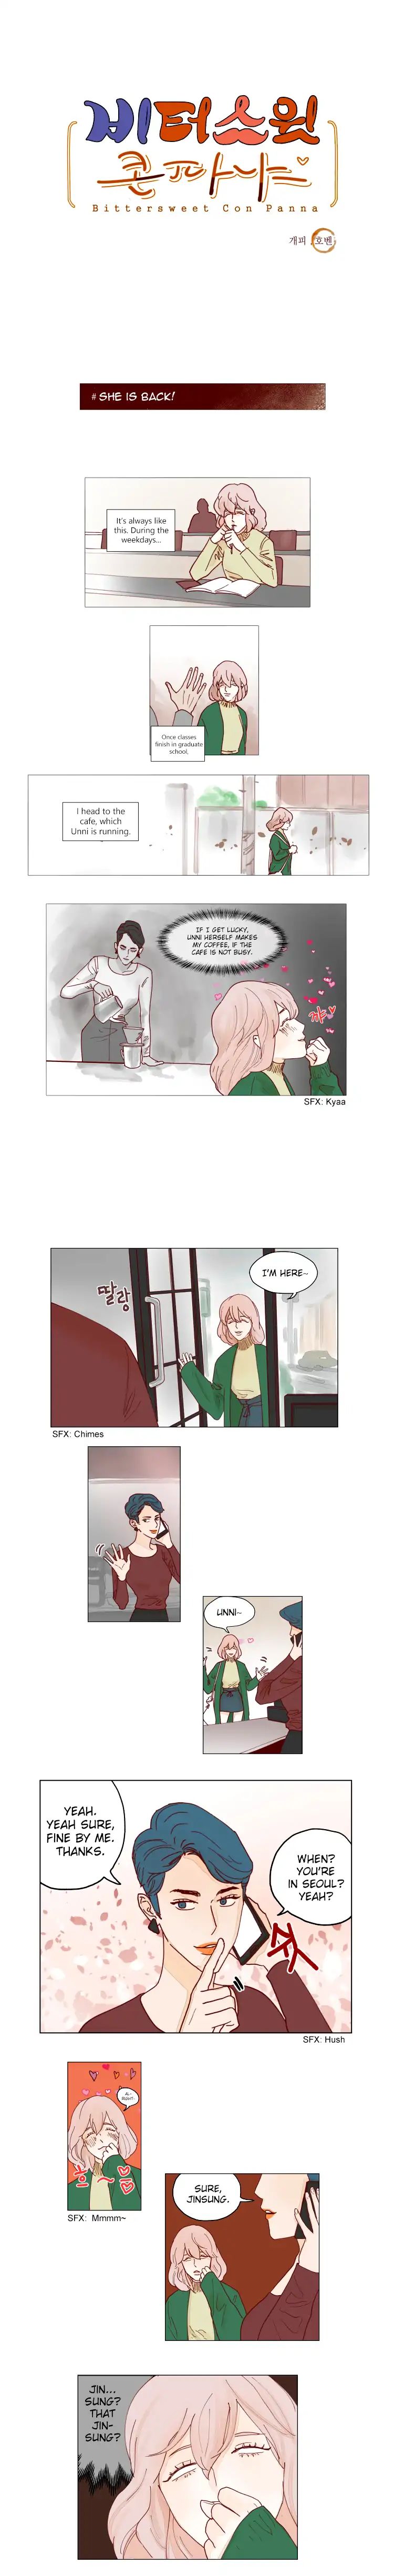 Bittersweet Con Panna - Page 3